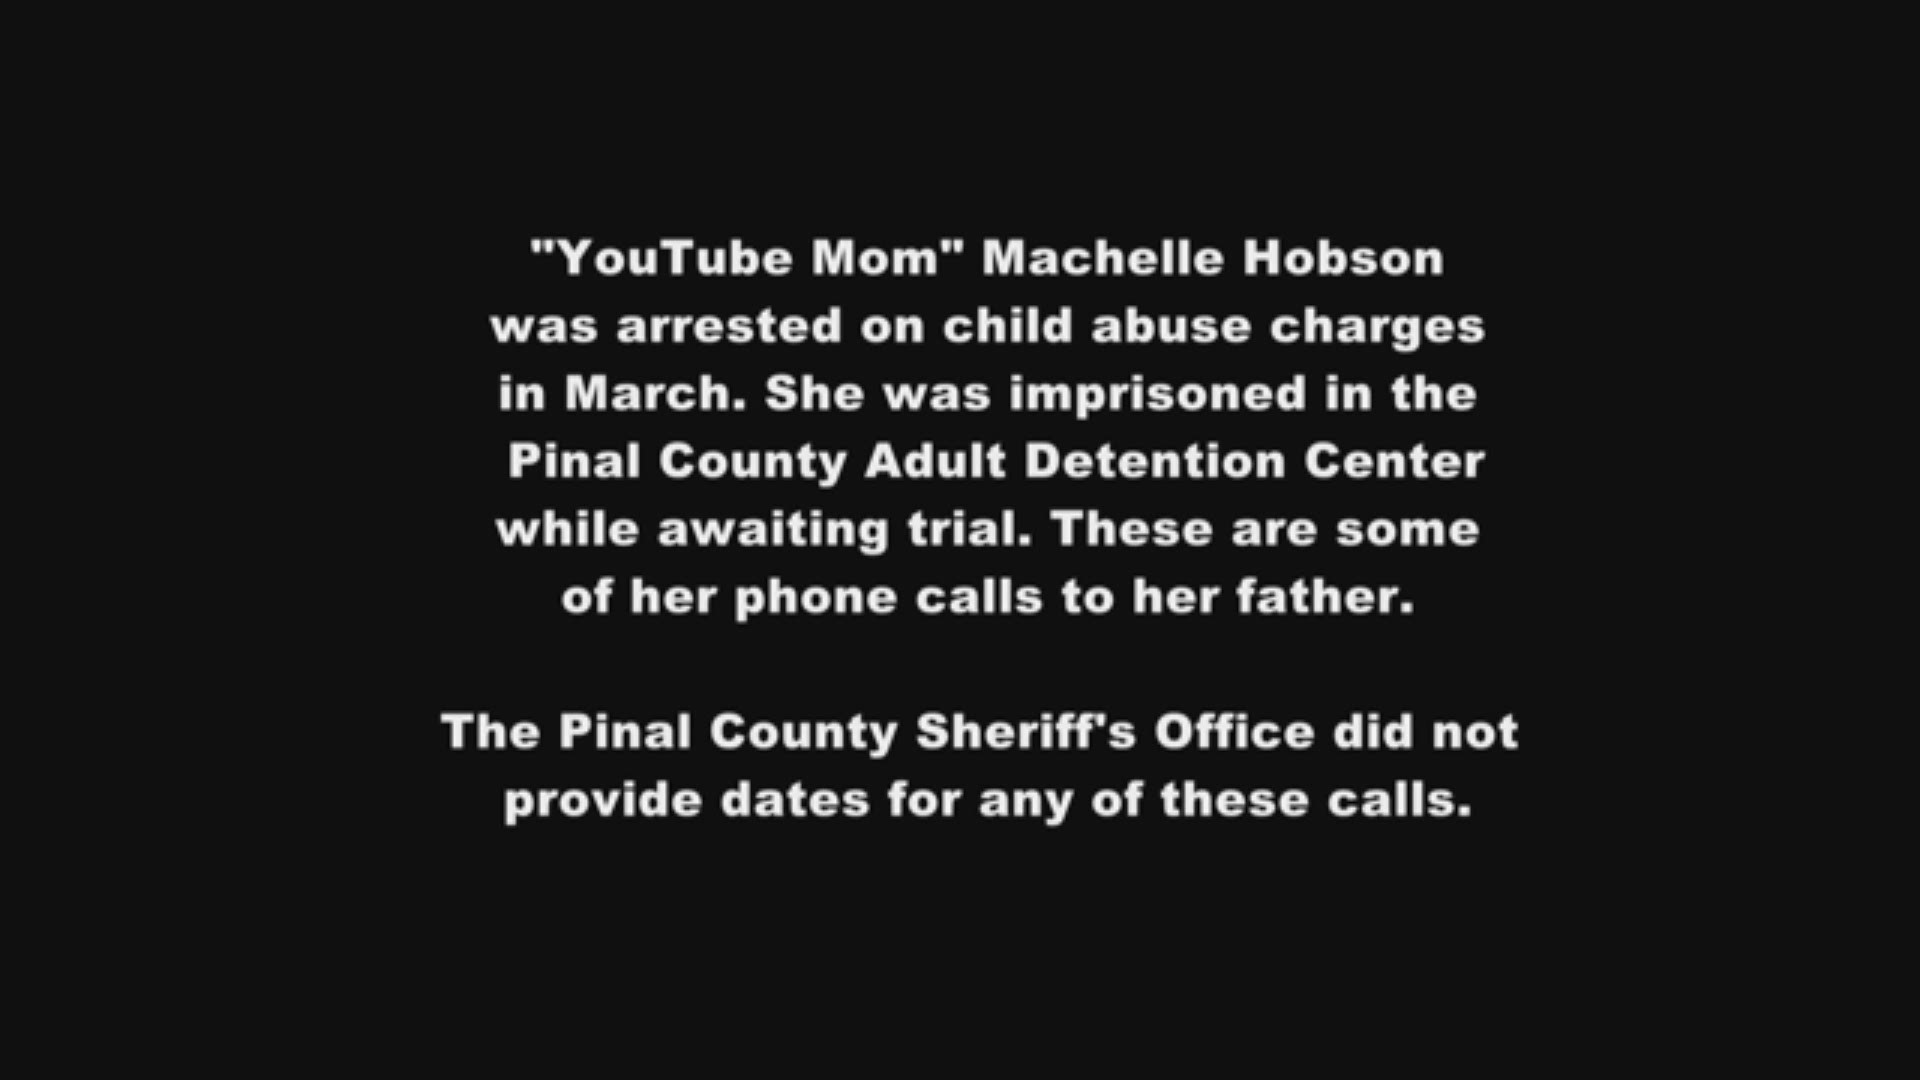 The 12 News I-Team obtained more than a dozen jailhouse phone calls made by Machelle Hobson shortly after her arrest.